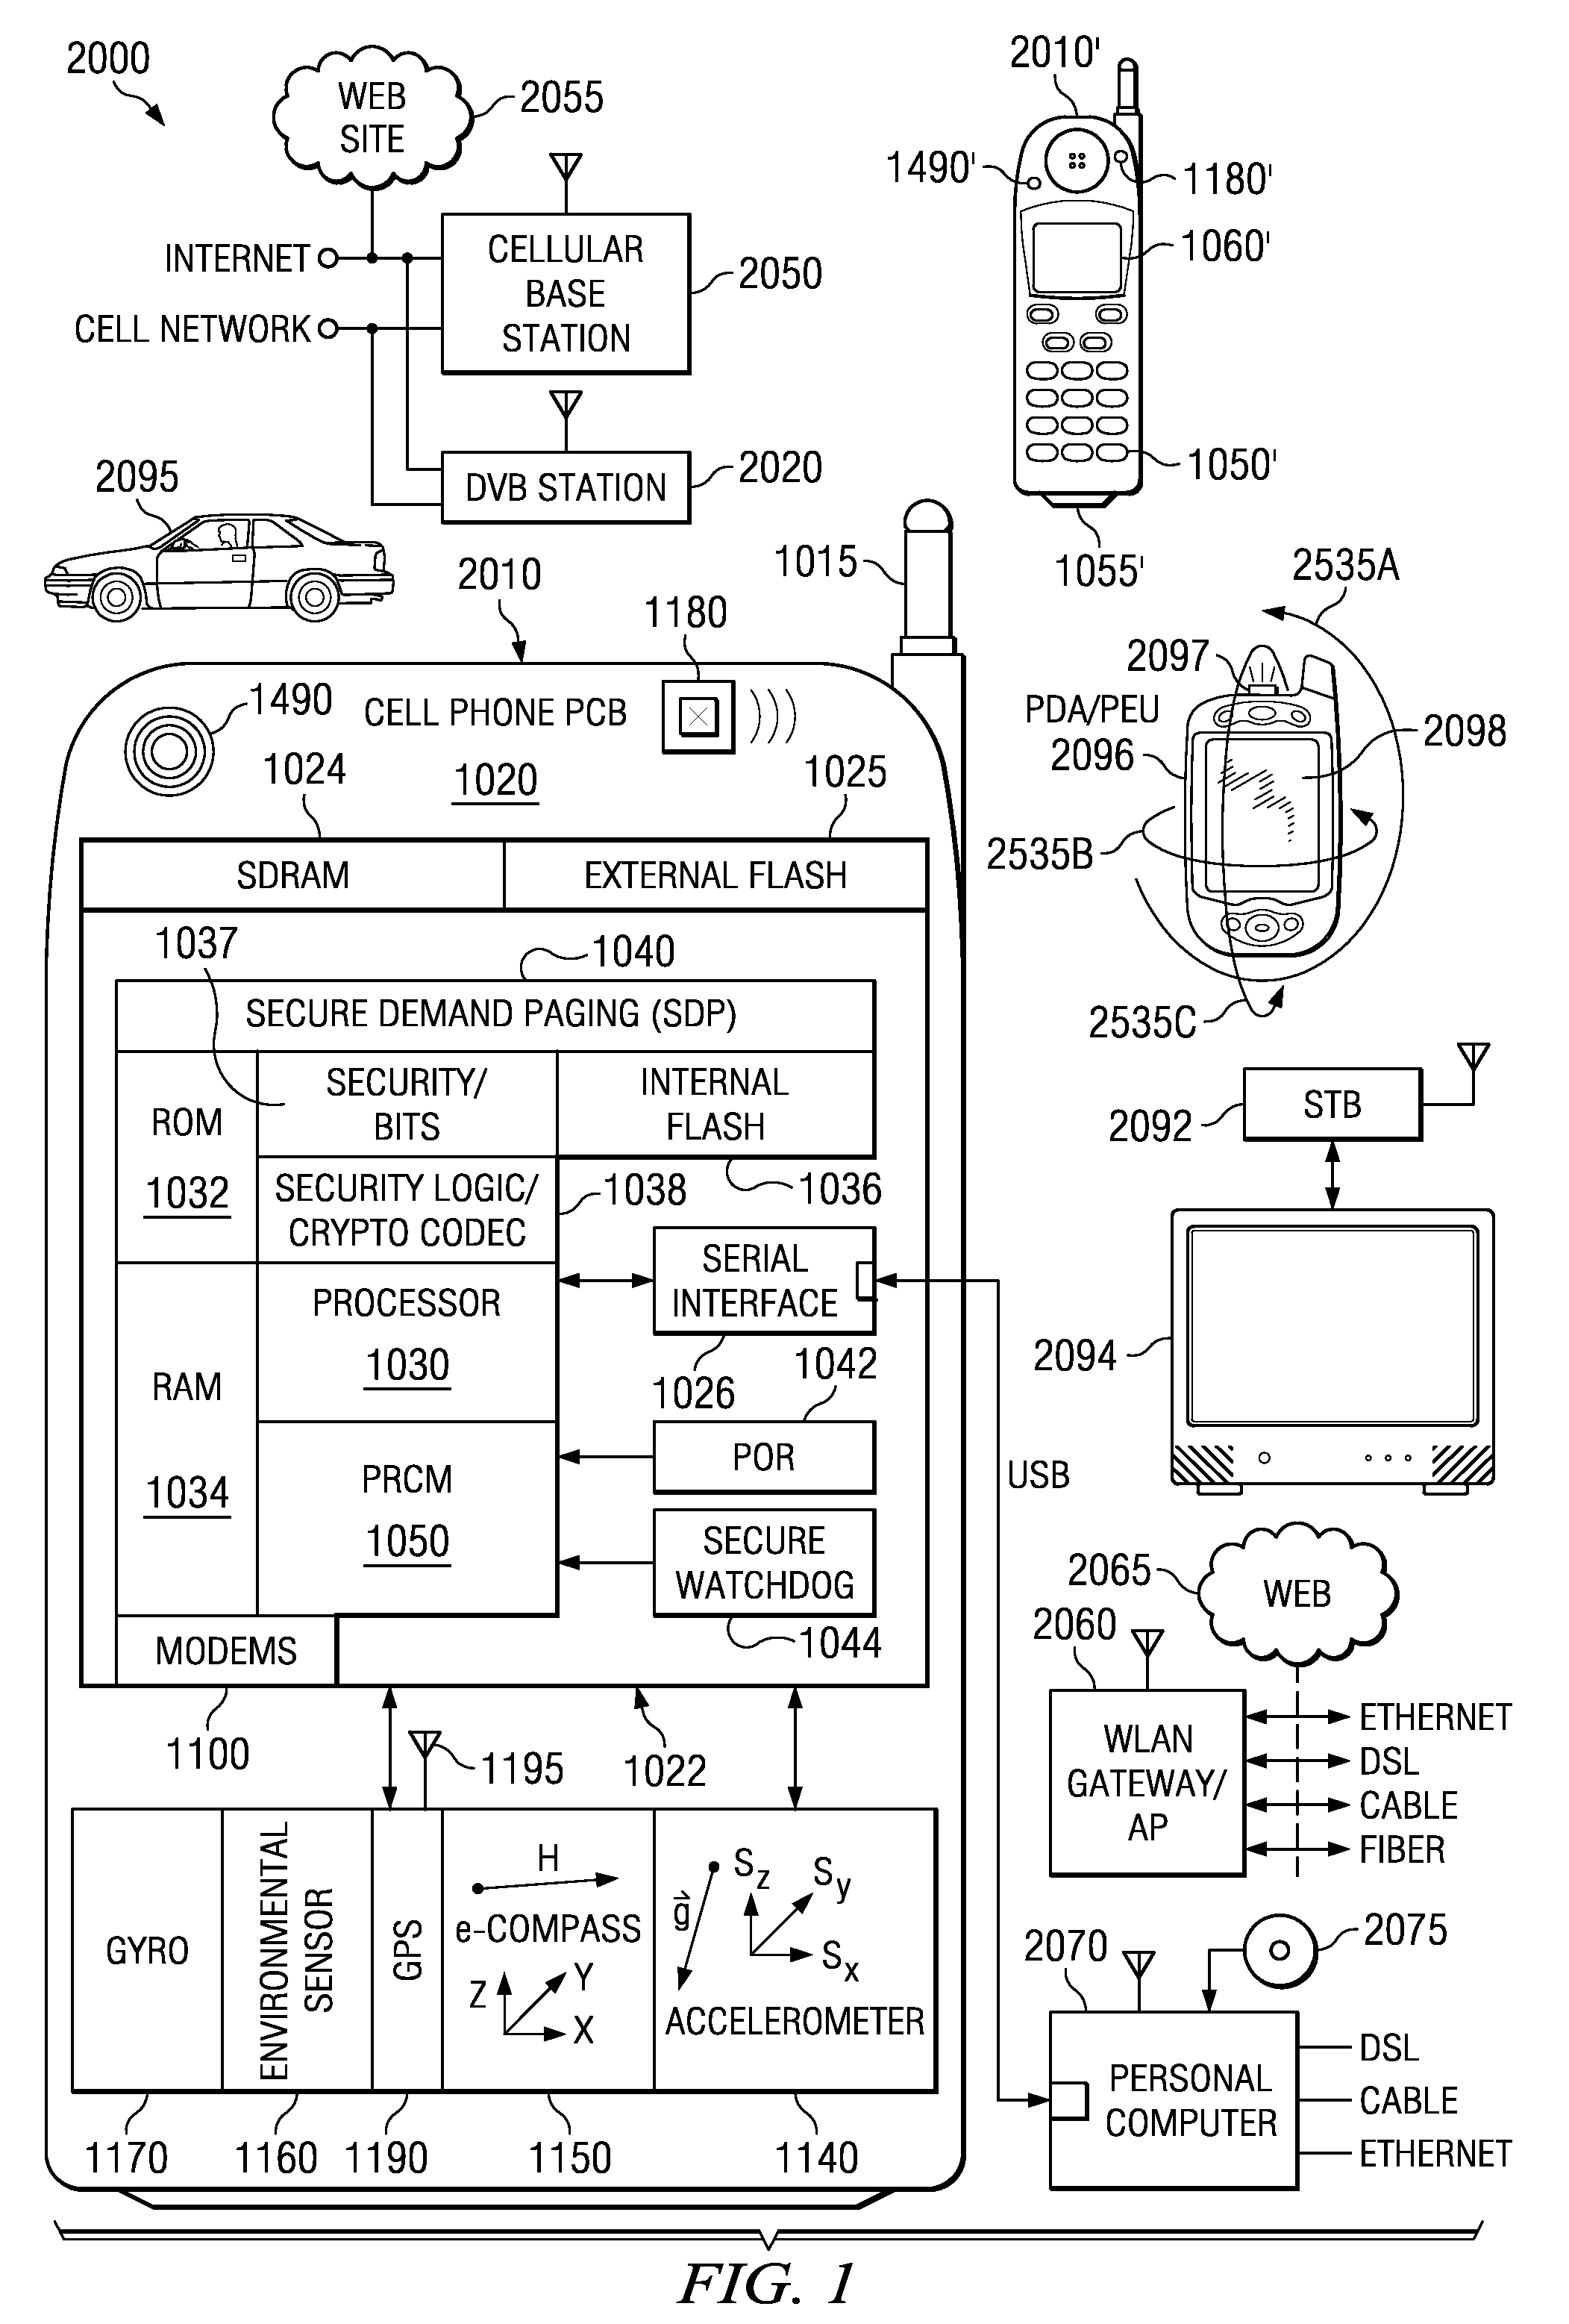 Processes for more accurately calibrating and operating e-compass for tilt error, circuits, and systems